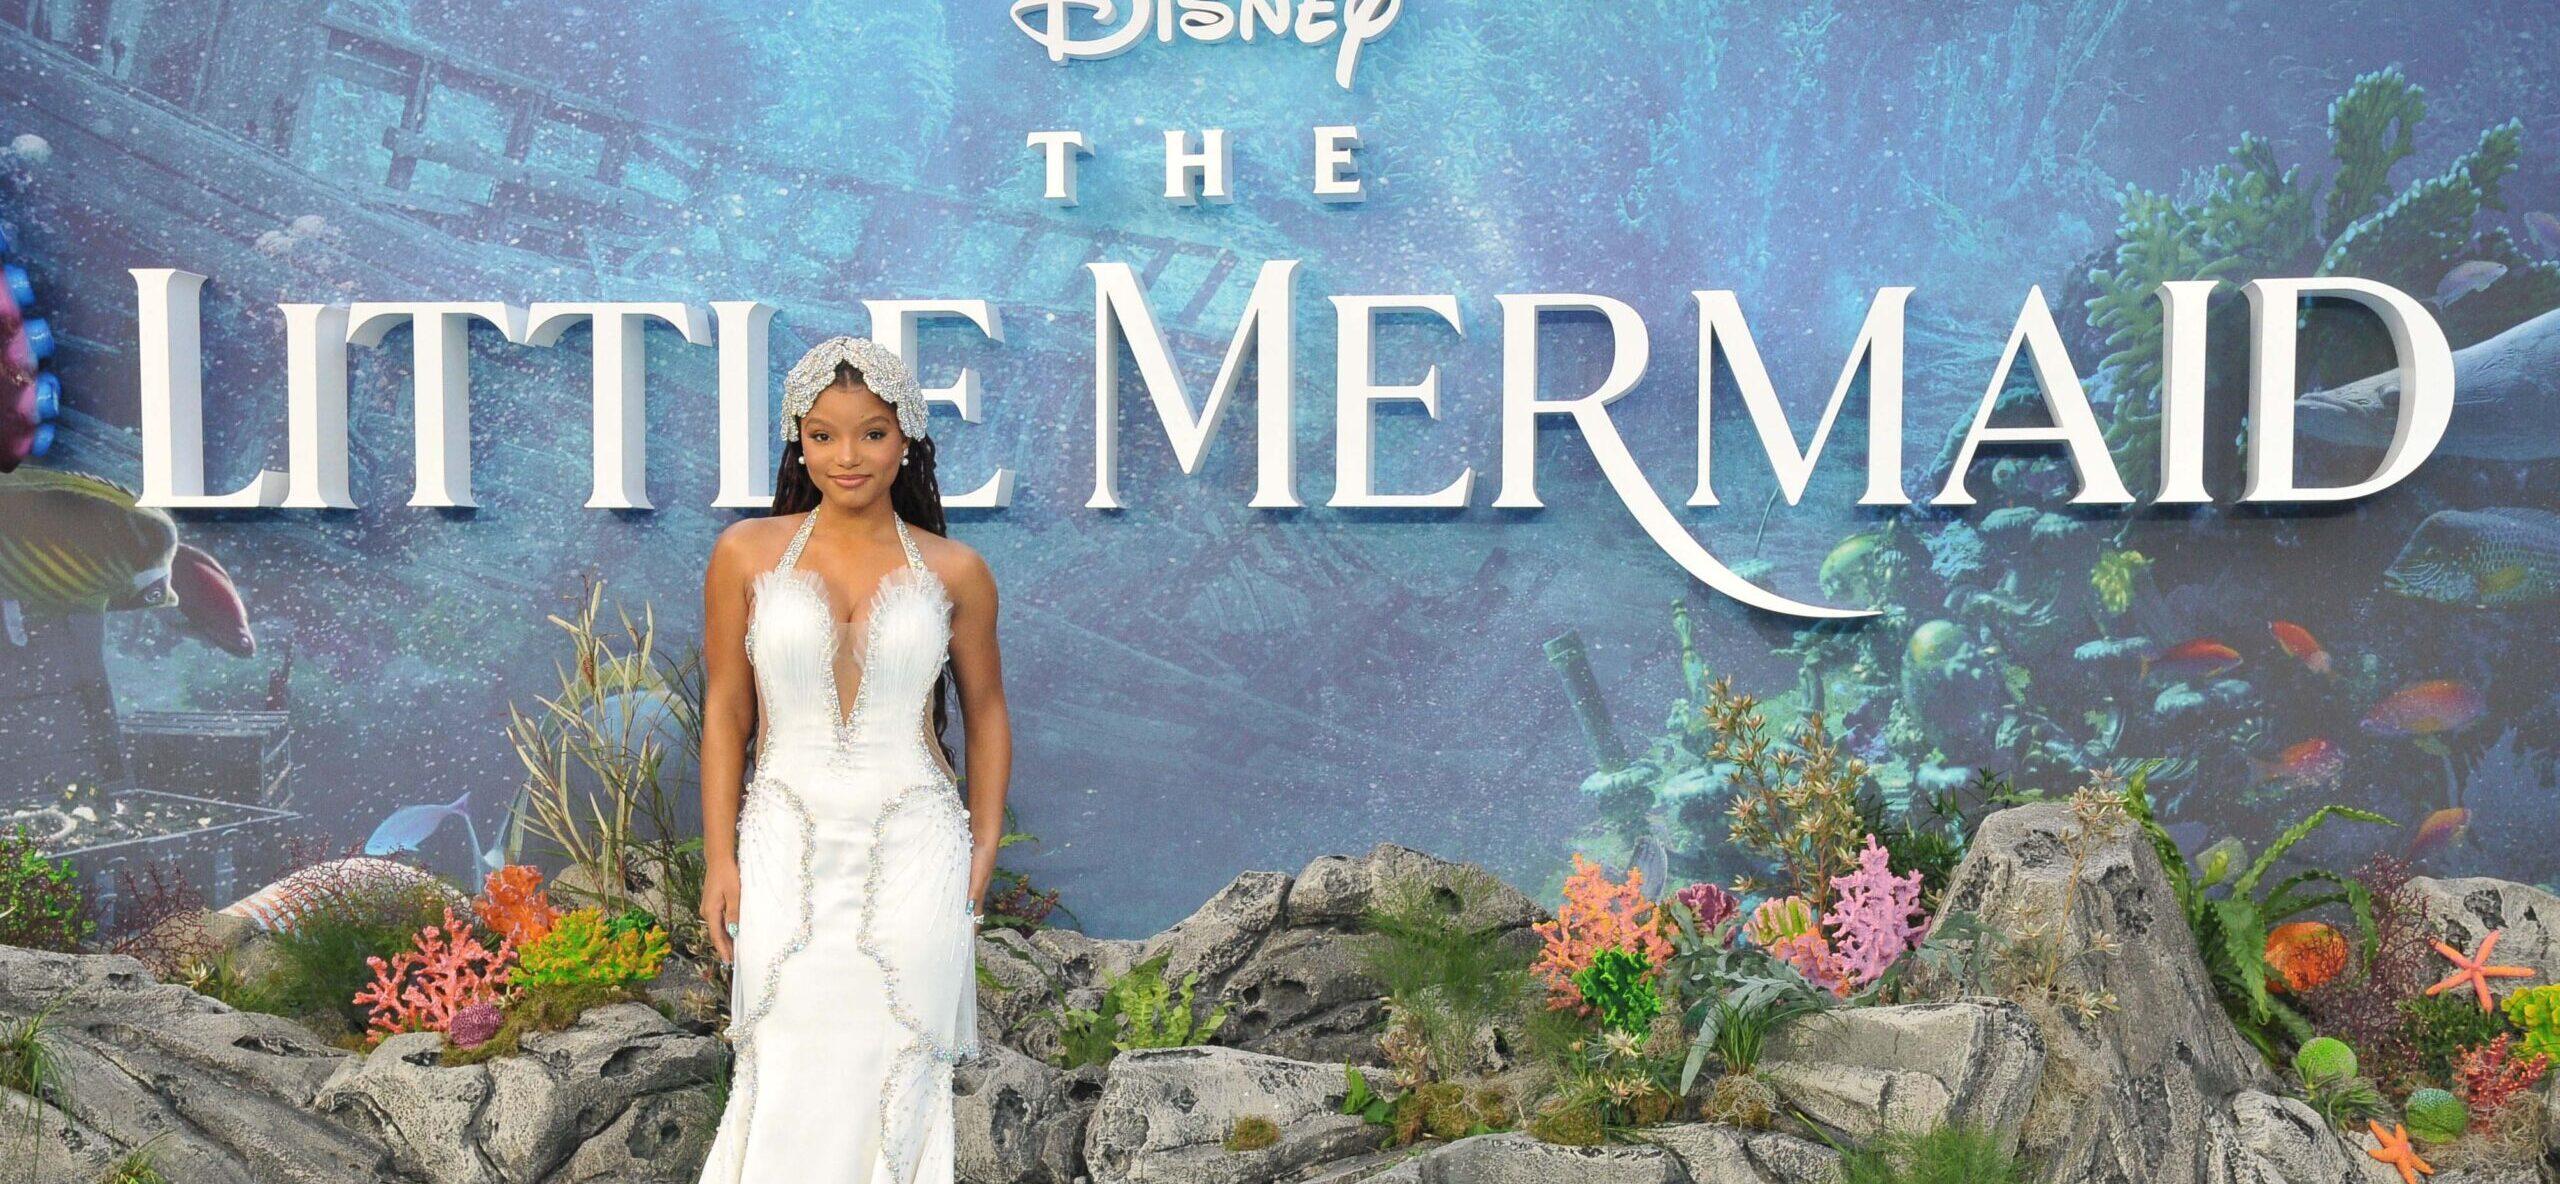 Disney’s ‘The Little Mermaid’ Tops Memorial Day Weekend Box Office With $164 Million Worldwide